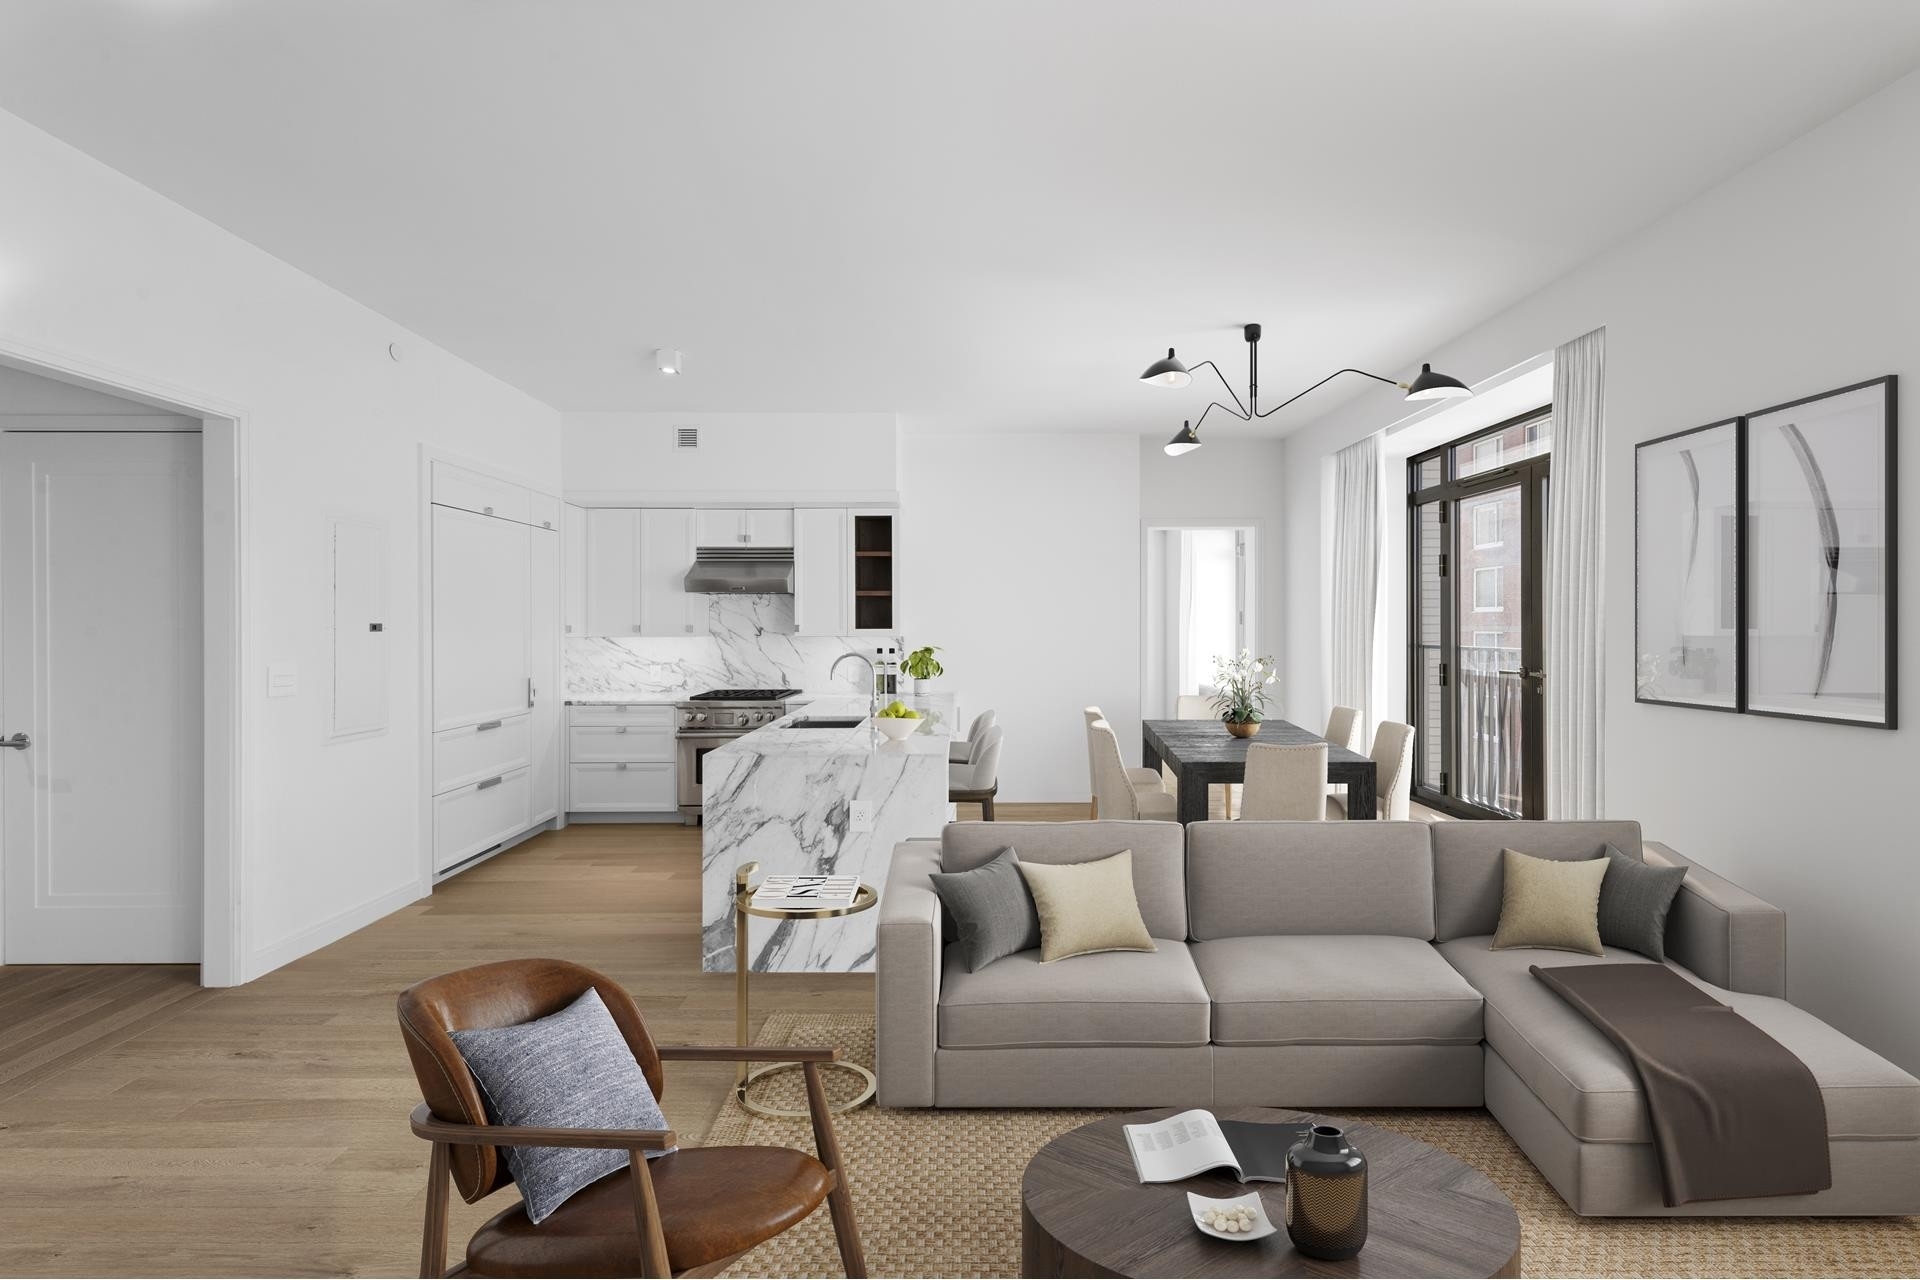 Co-op / Condo for Sale at The Chamberlain, 269 W 87TH ST, 11C Upper West Side, New York, New York 10024